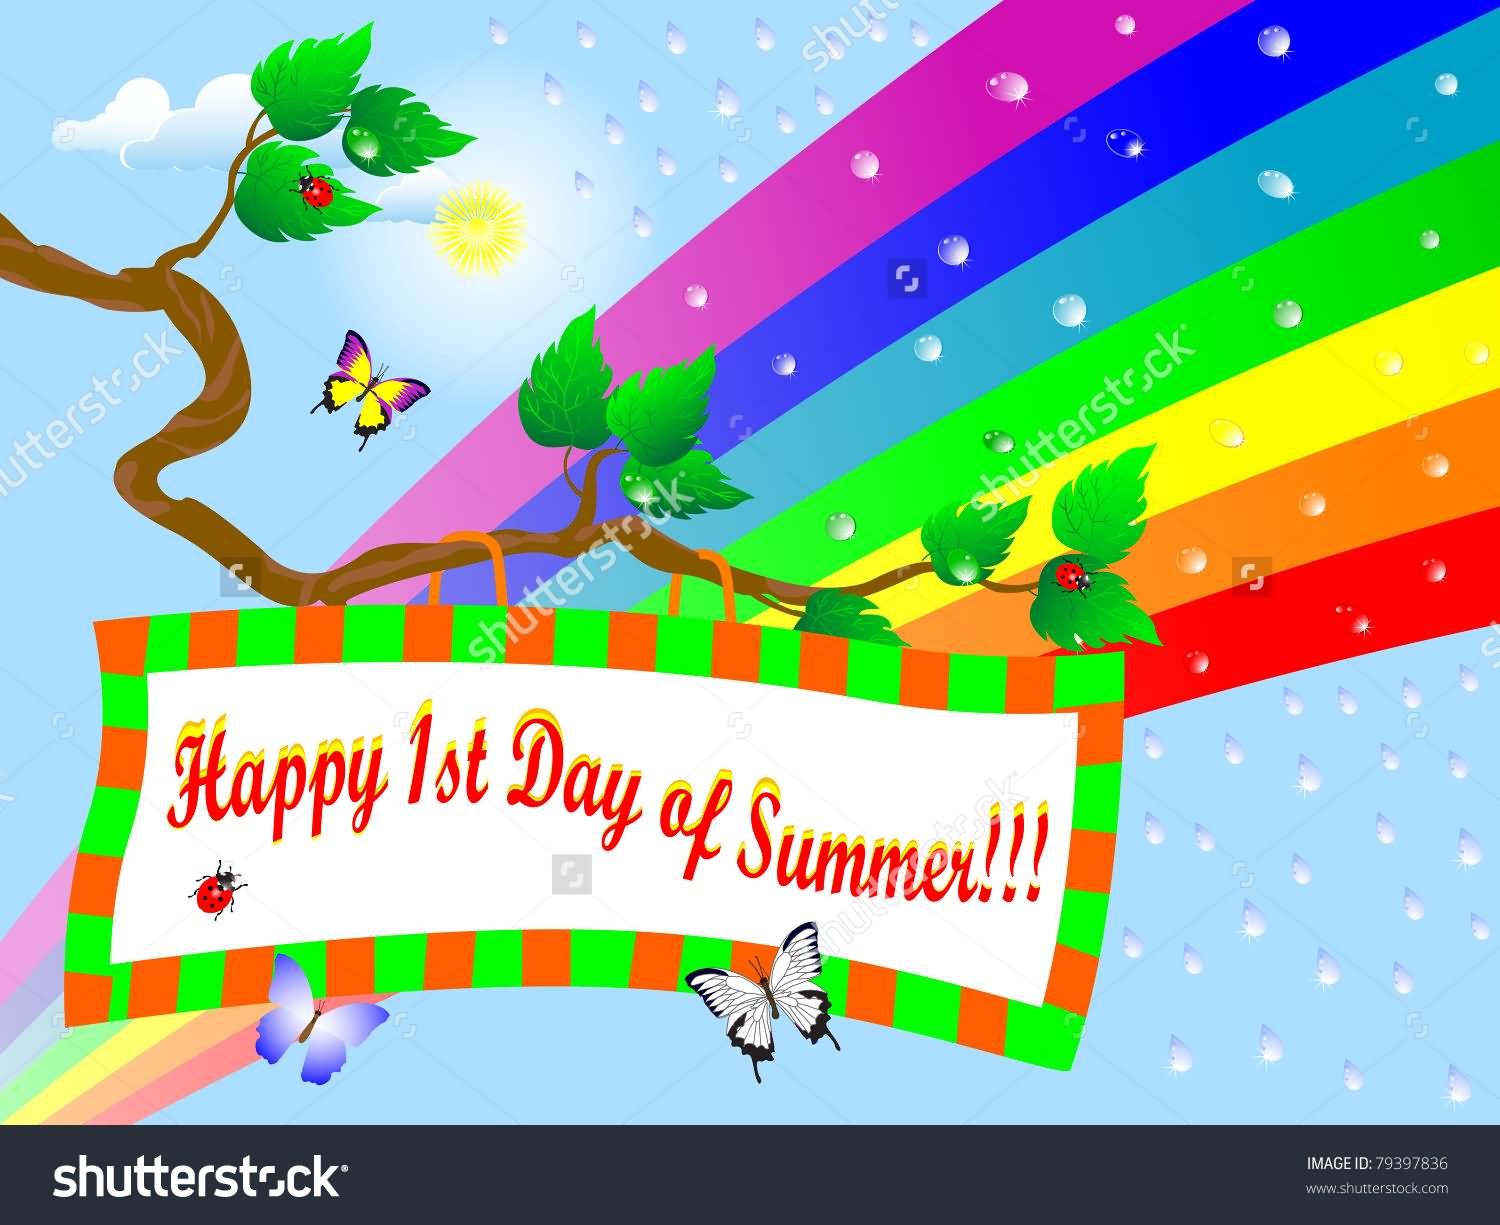 Happy 1st Day Of Summer Wishes Image